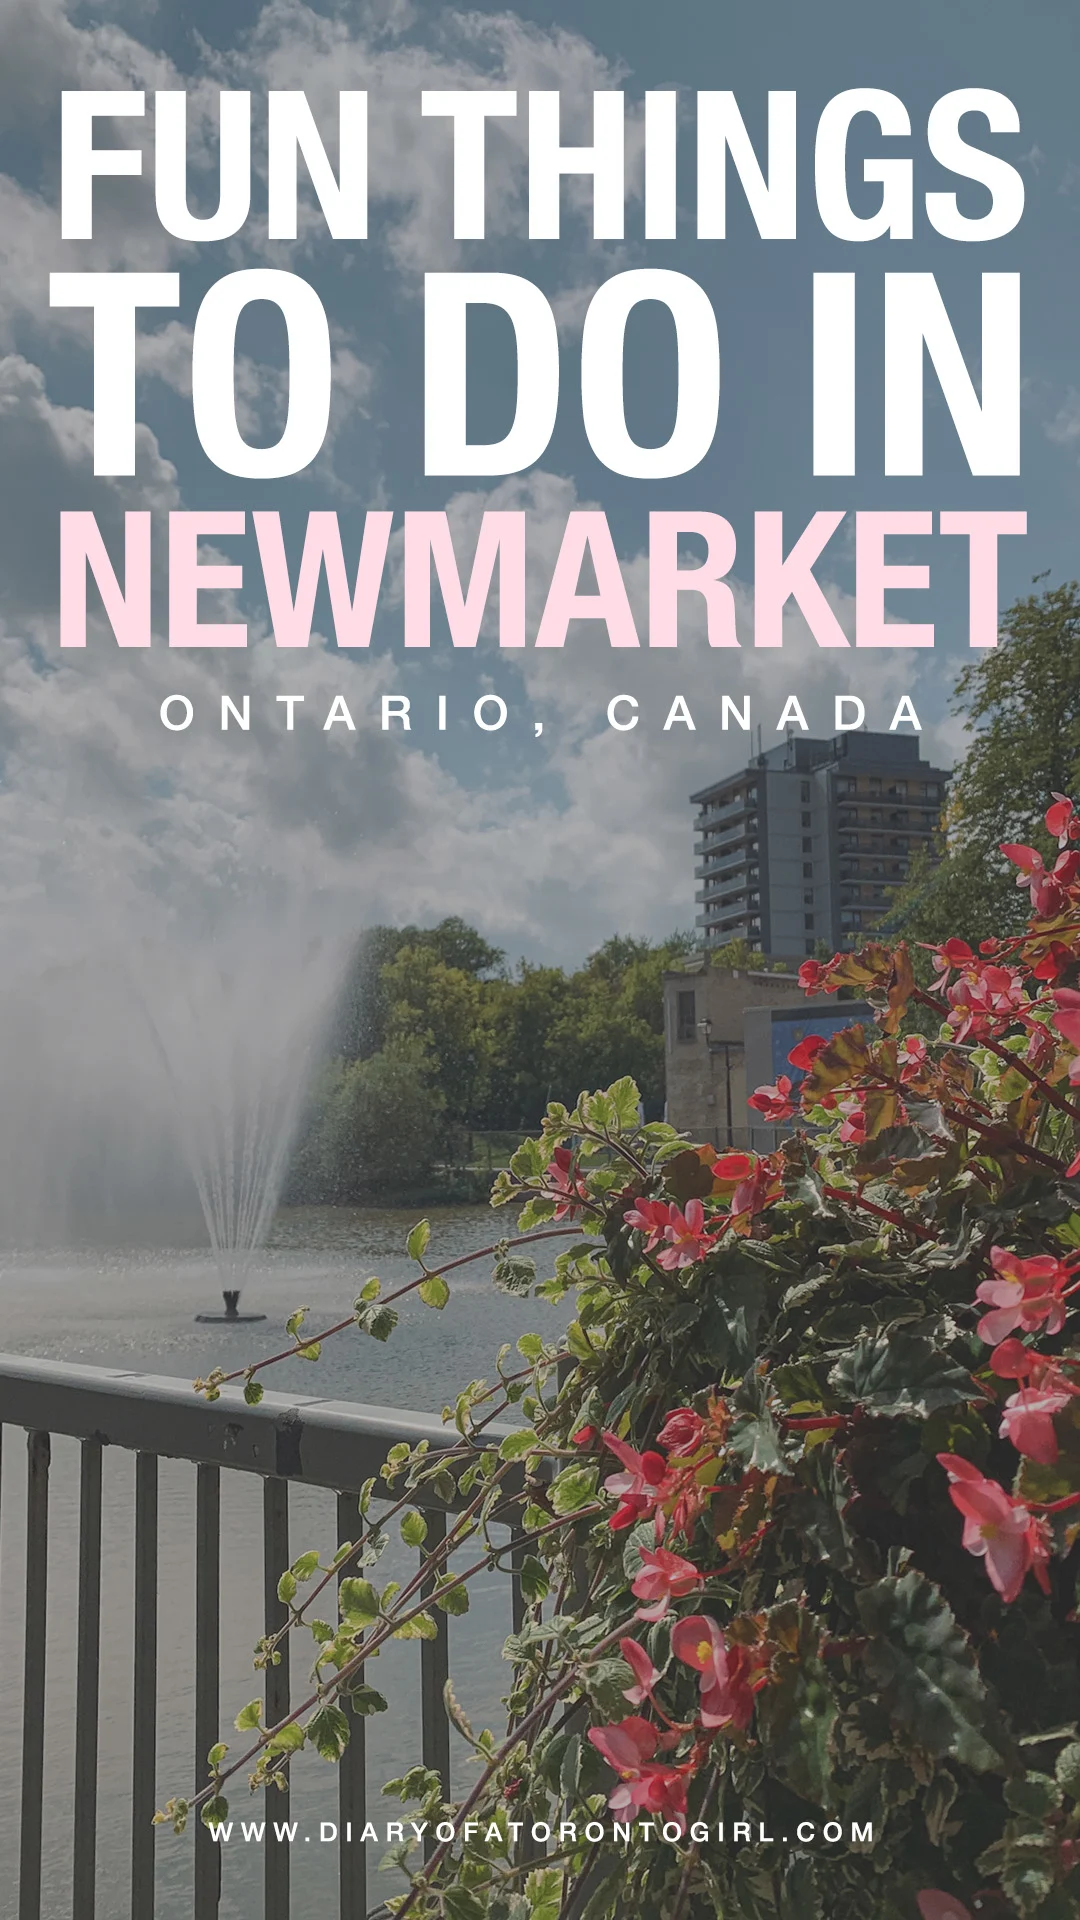 Fun things to do in Newmarket, Ontario